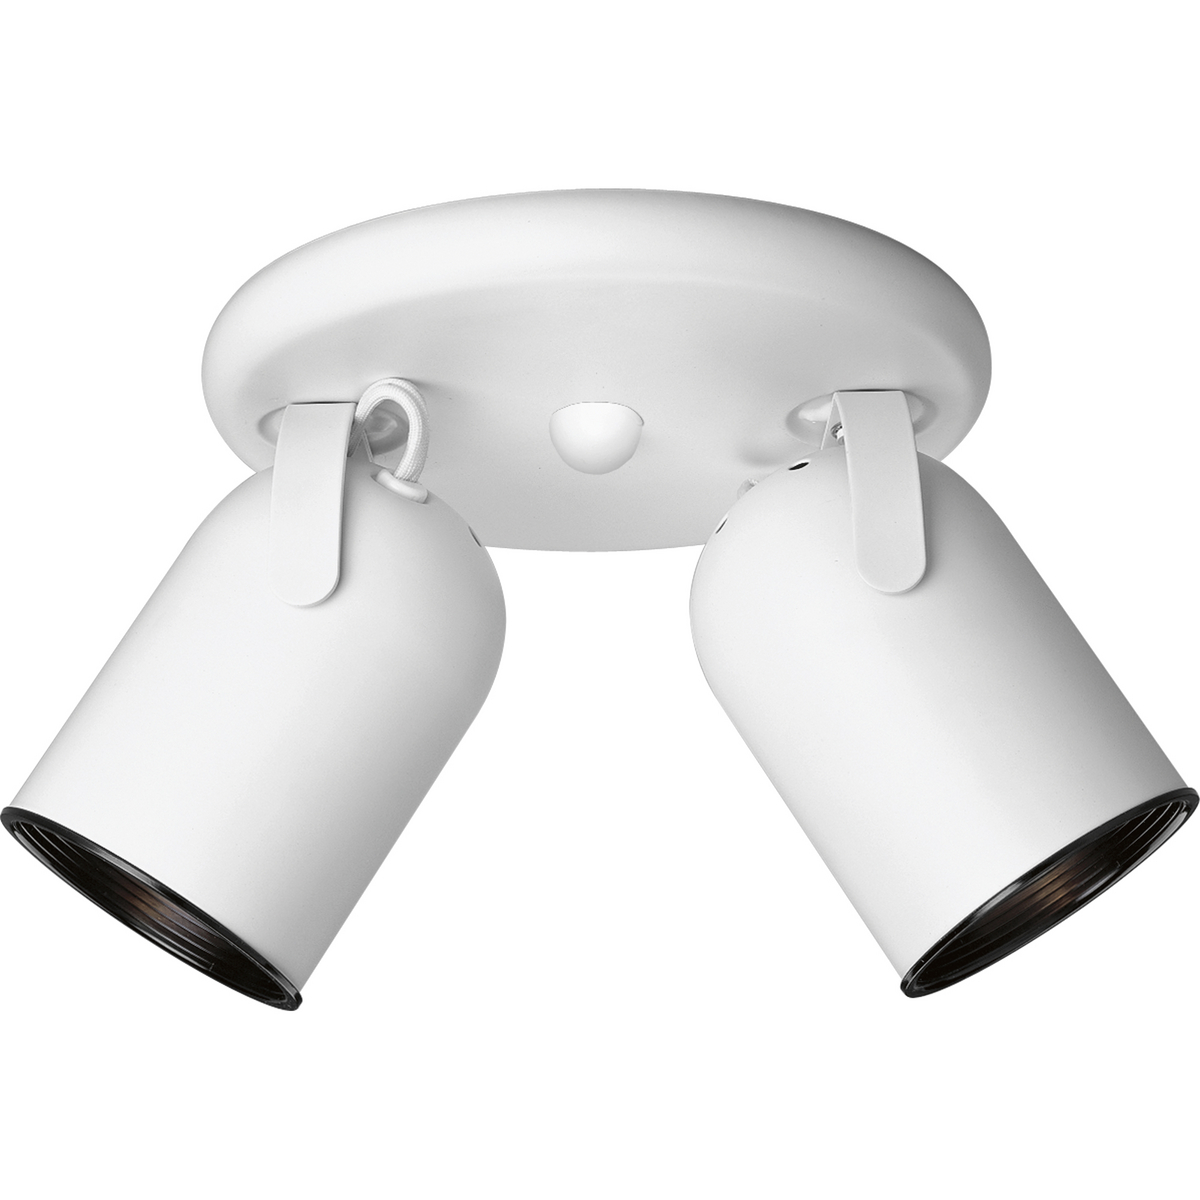 Two-light round back ceiling mount directional in White finish.